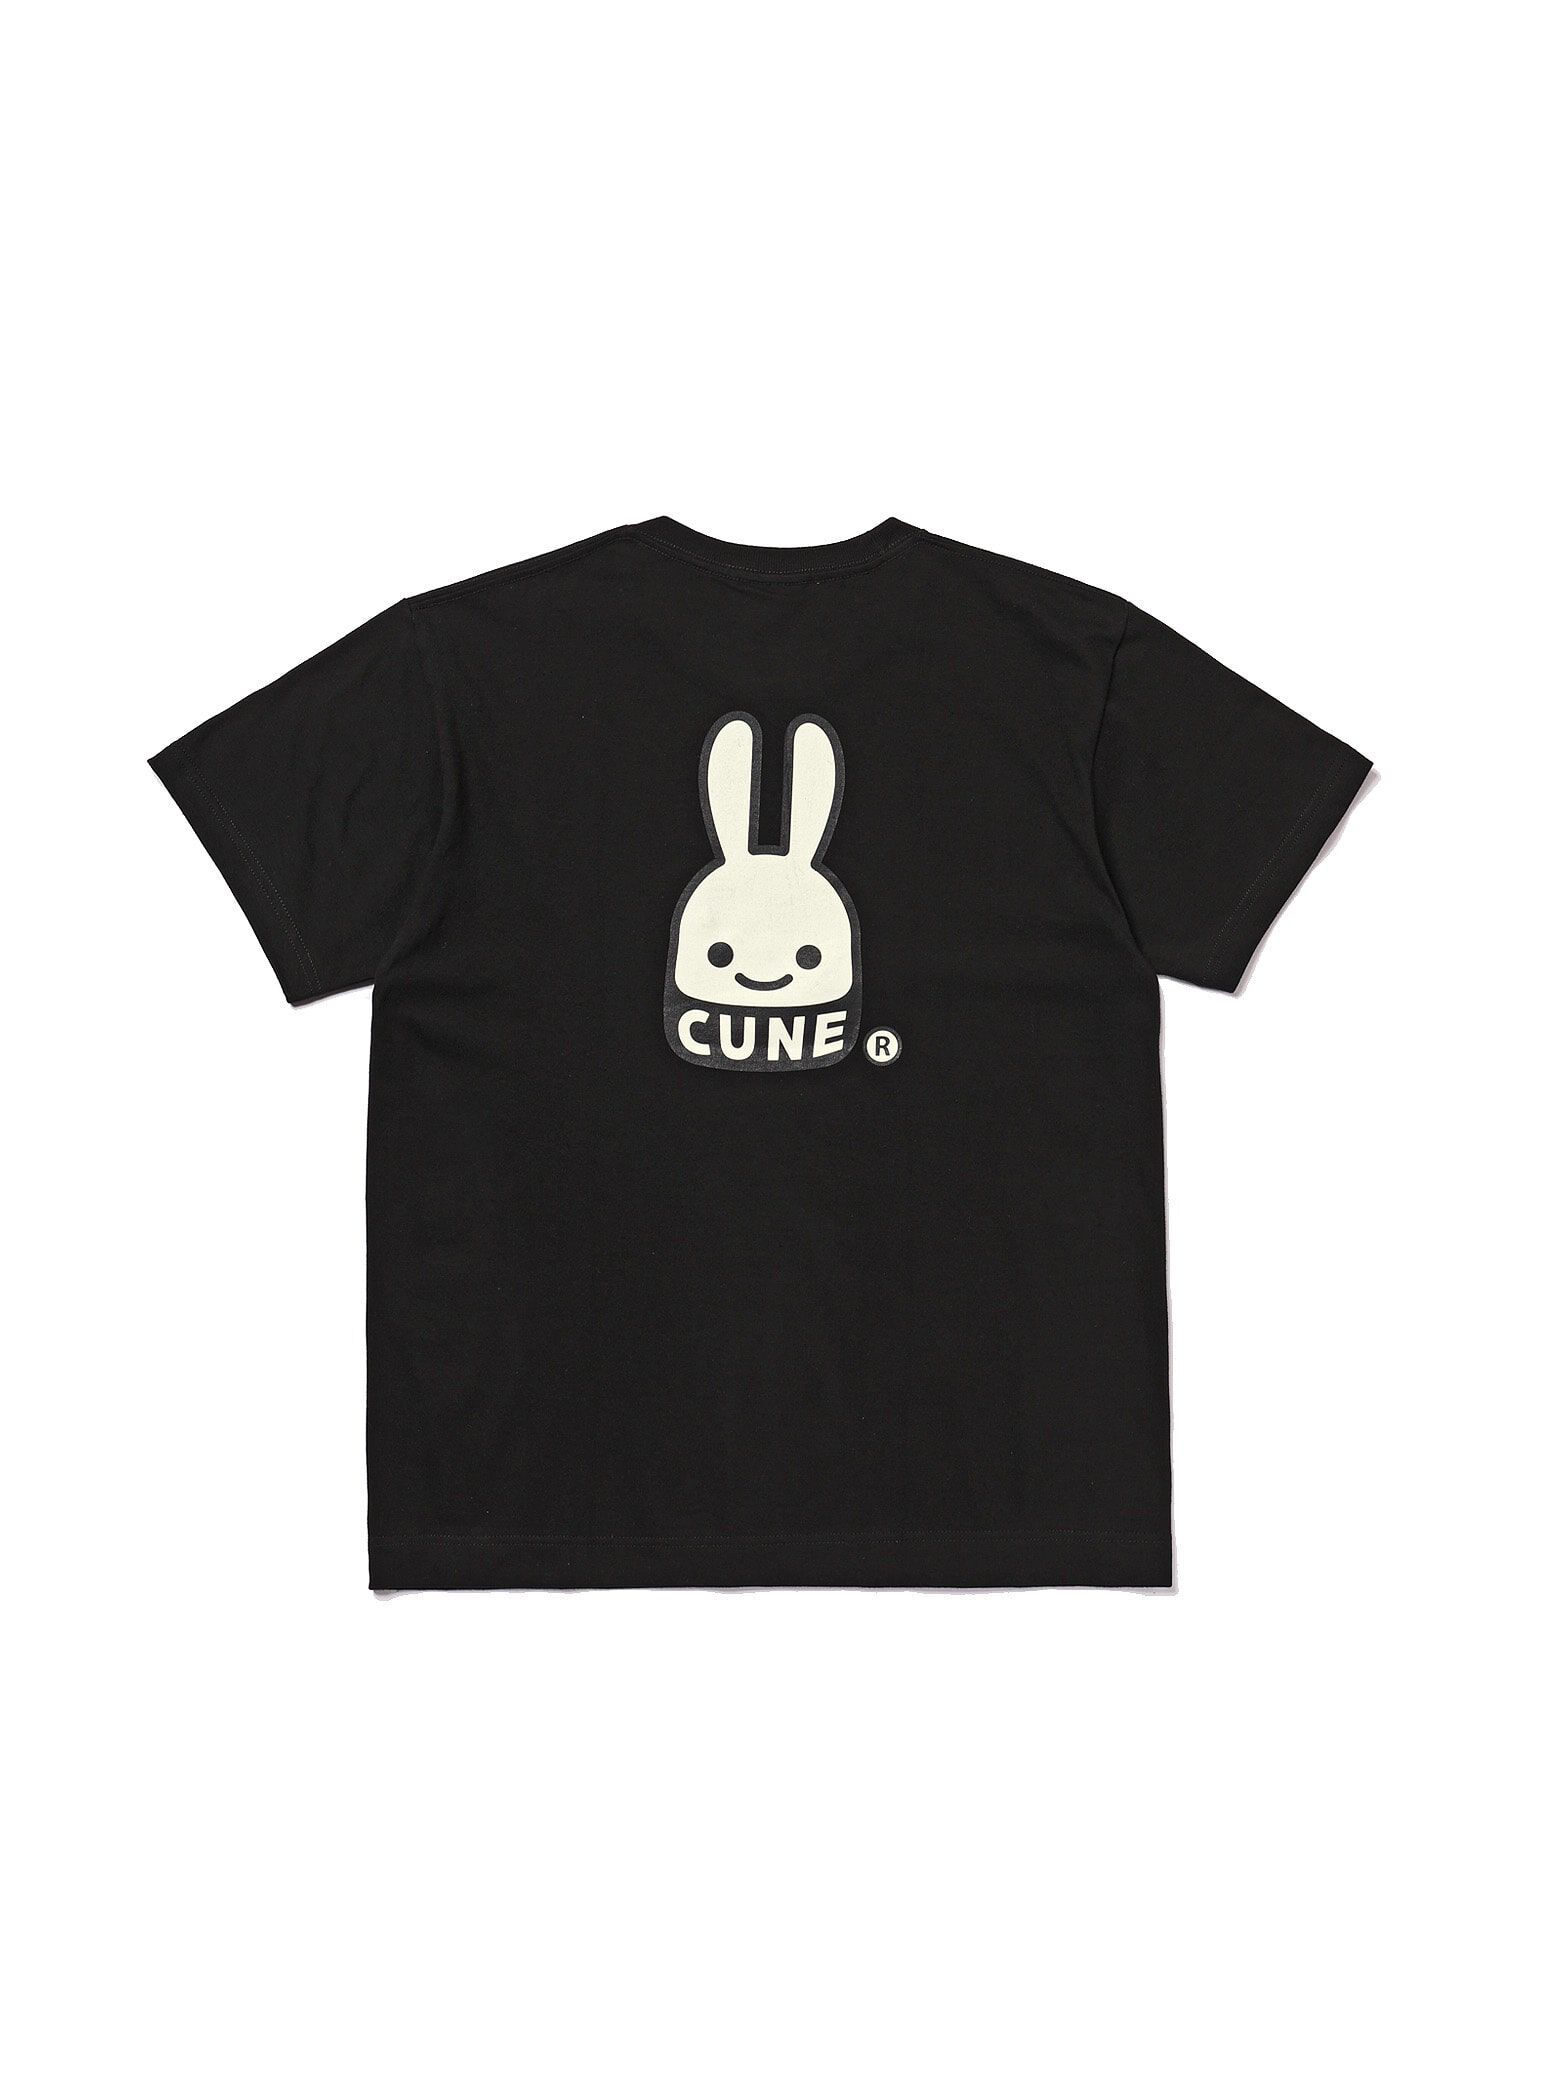 GRAPHIC T-SHIRTS | CUNE Official Global Online Store